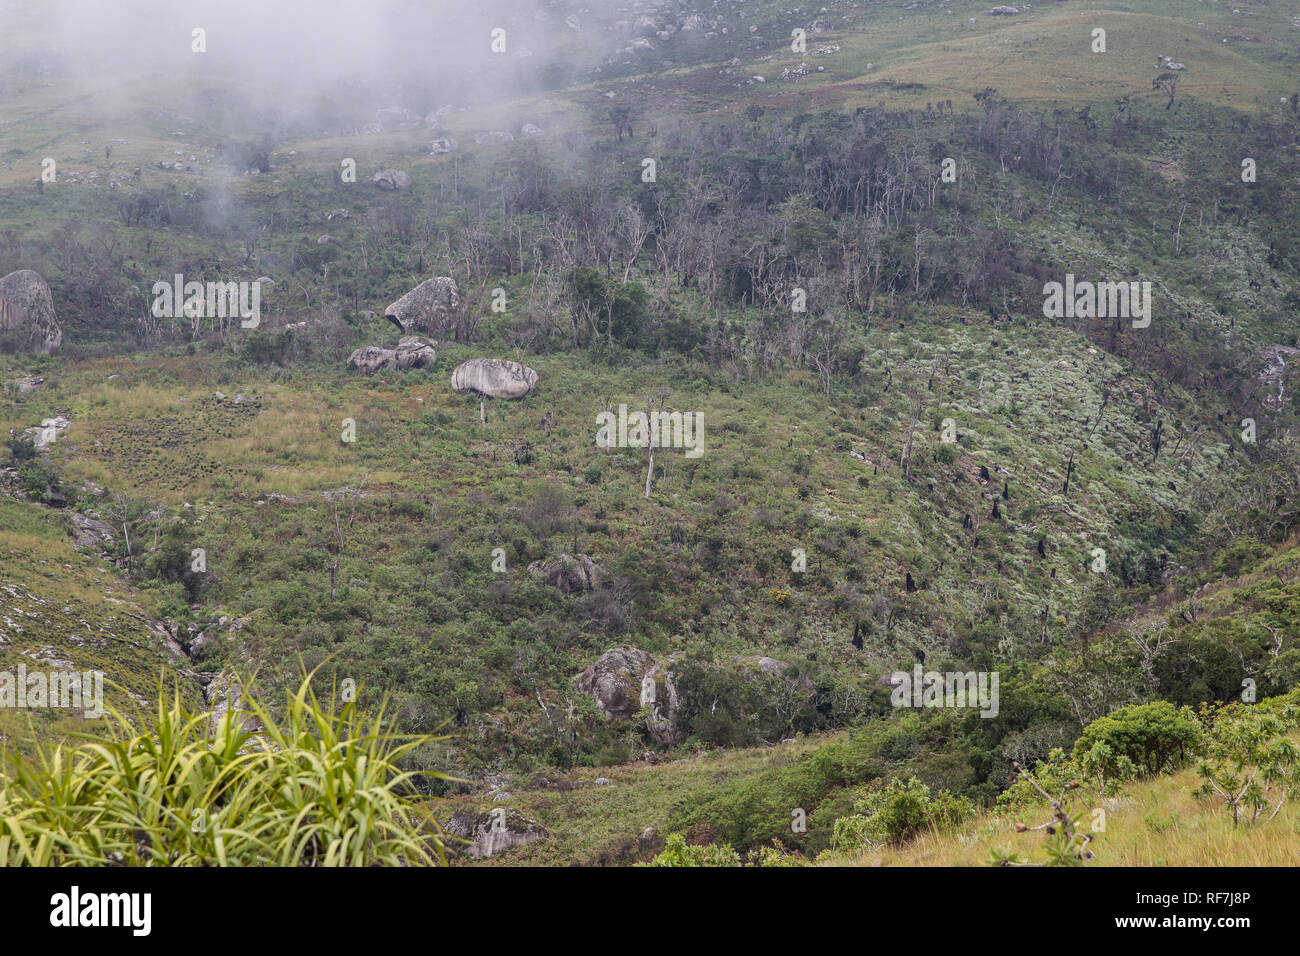 The critically endangered Mulanje Cedar, Widdringtonia whytei, was clear cut by illegal loggers from this area of Mount Mulanje plateau, Malawi. Stock Photo